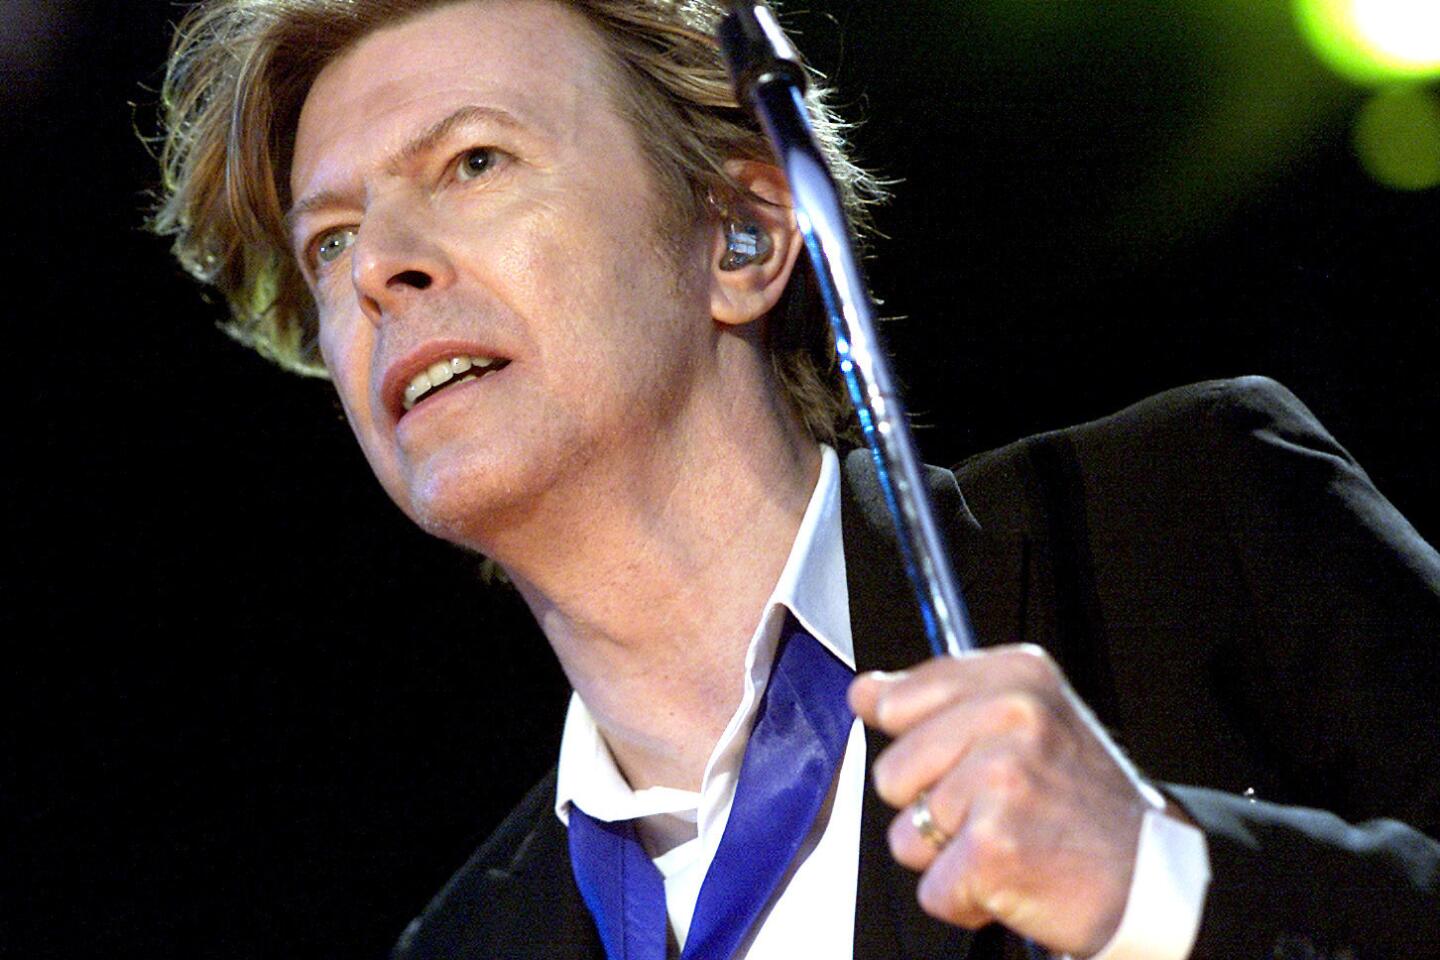 Beatles step aside for David Bowie on weekend radio show - Los 